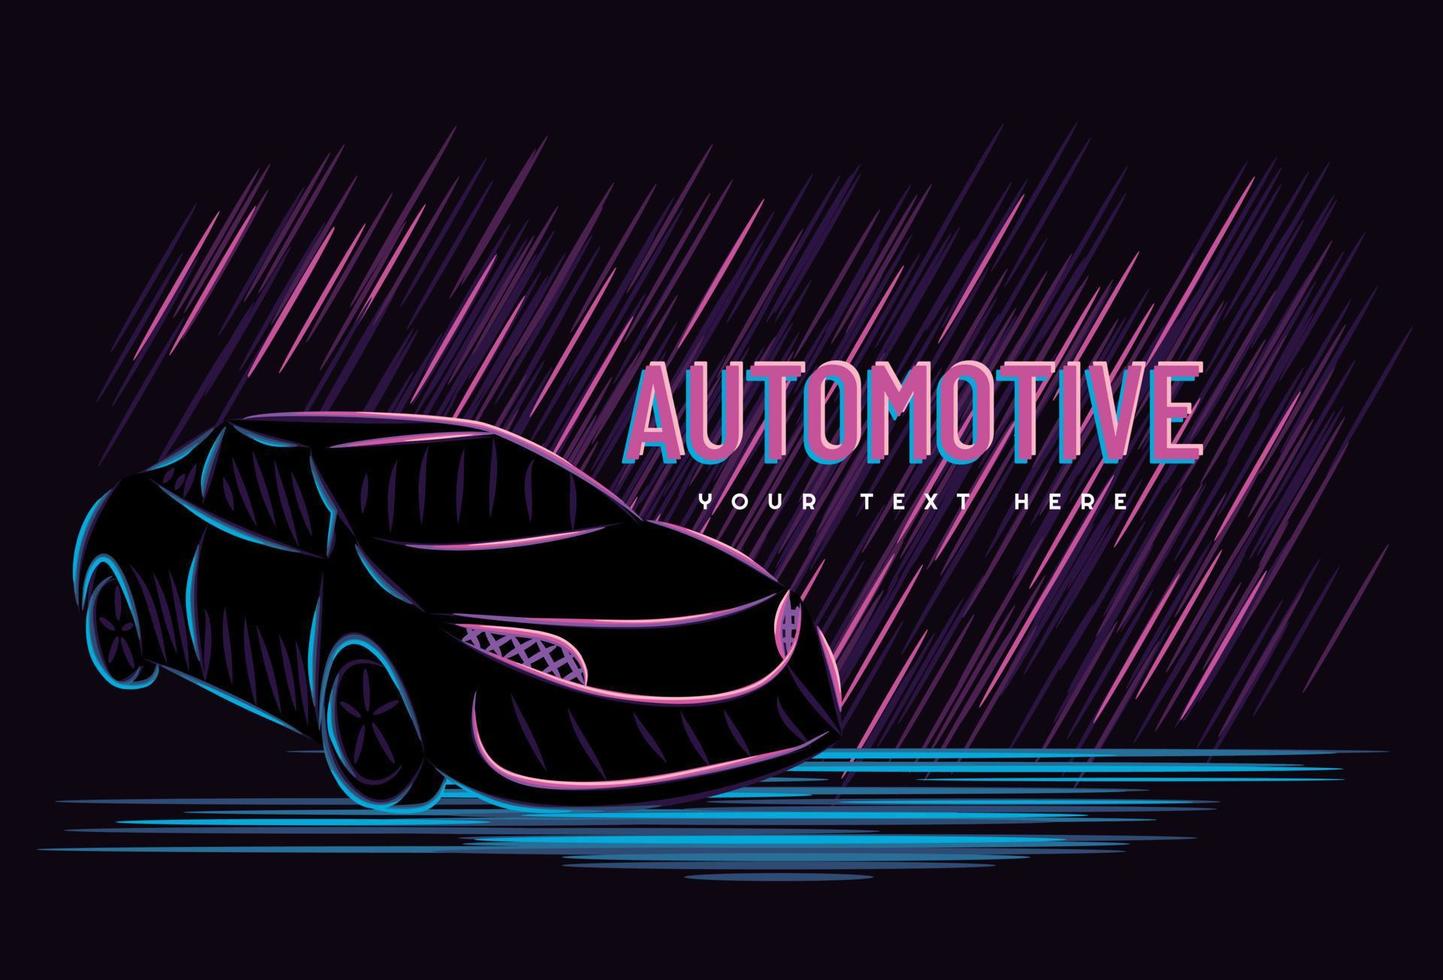 Illustration vector graphic of car automotive concept with line art neon sign style, Good for t shirt, banner, poster, landing page, flyer.